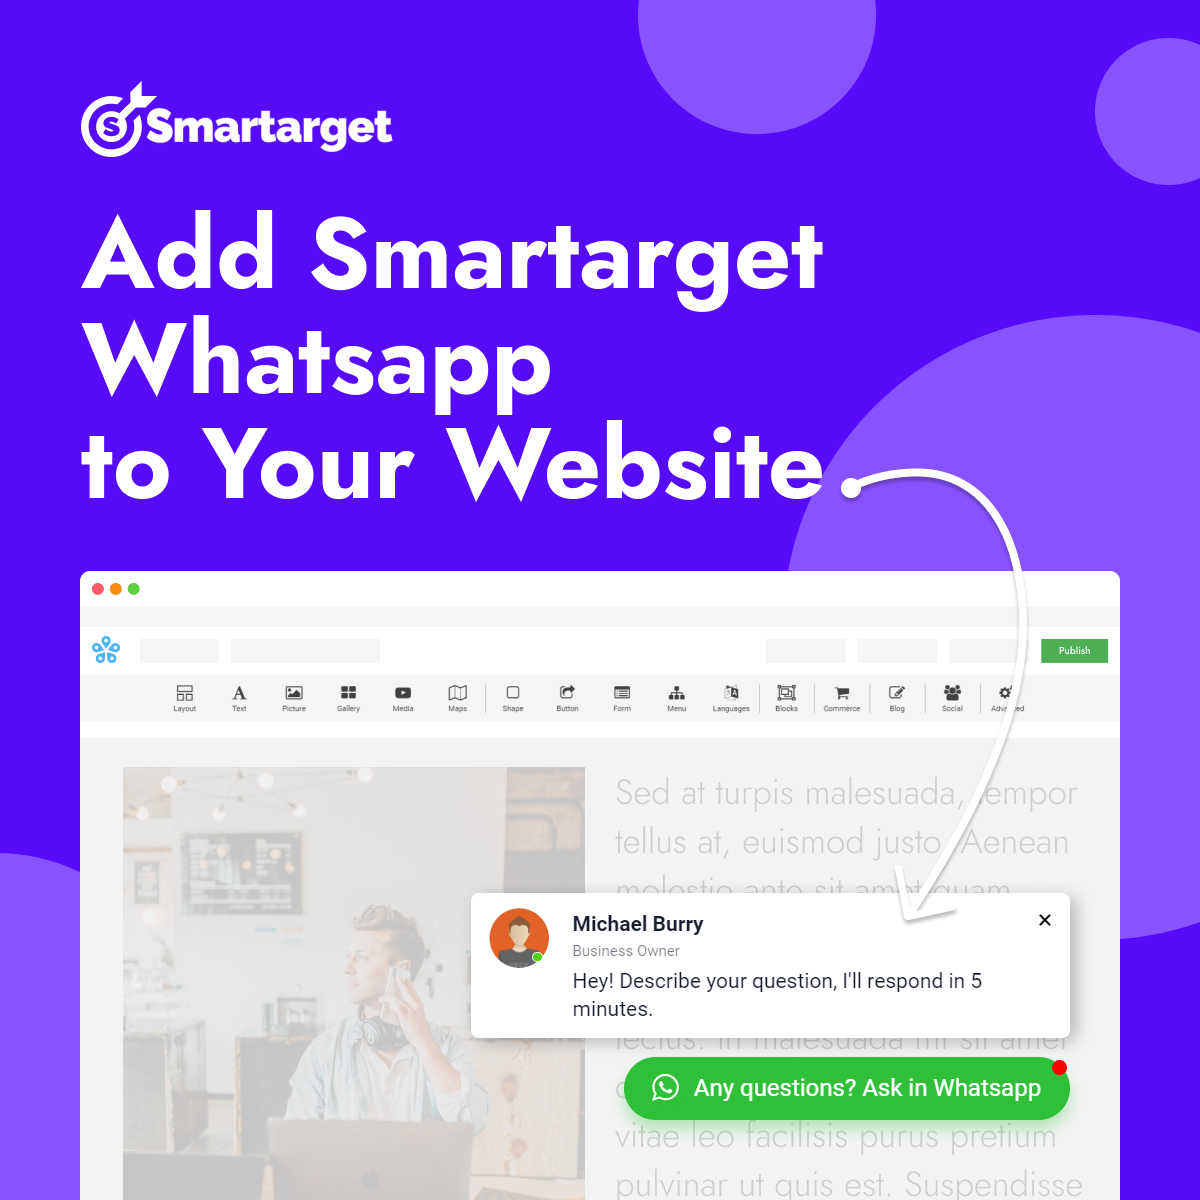 Add Smartarget Whasapp to your website